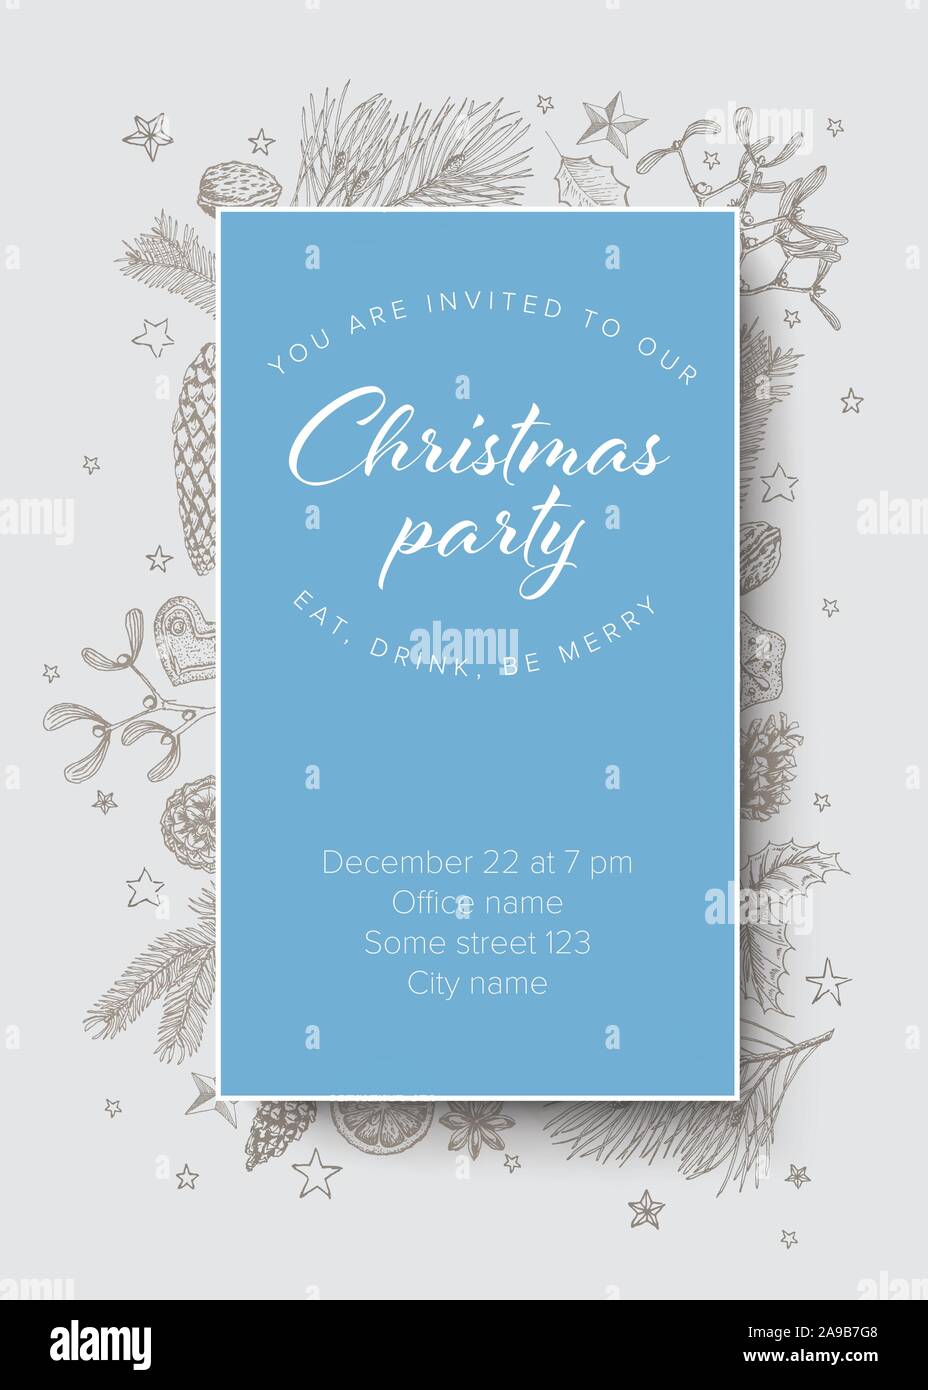 Work Christmas Party Invitation Template from c8.alamy.com